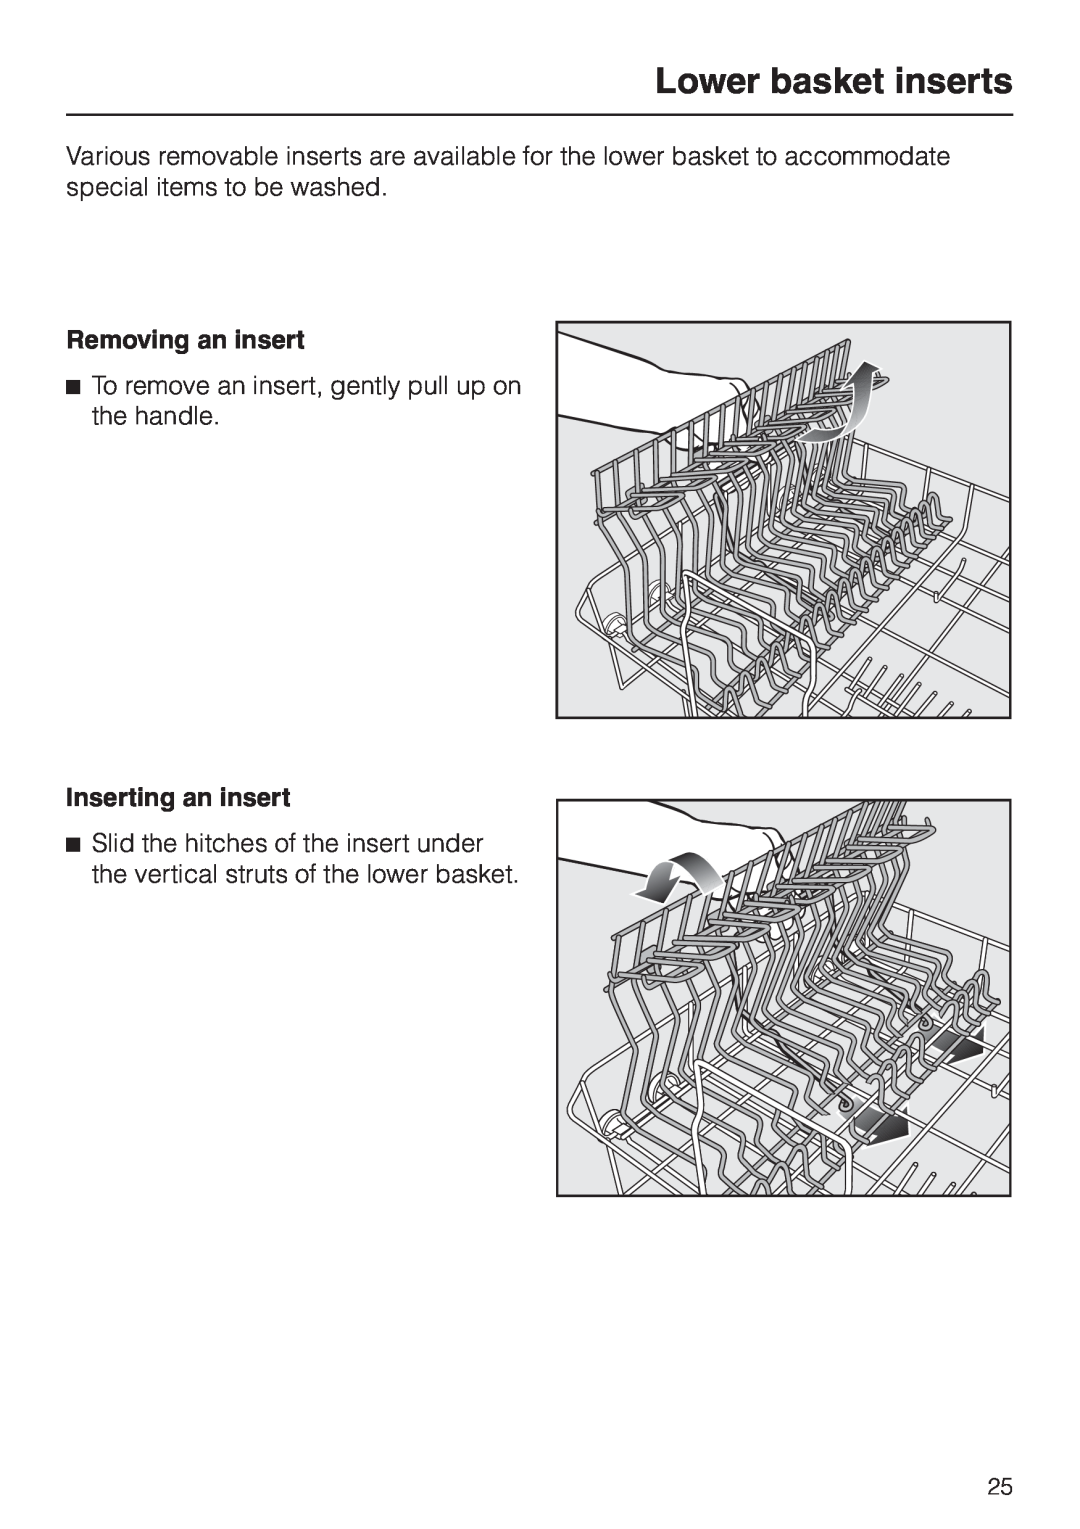 Miele HG01 operating instructions Lower basket inserts, Removing an insert, Inserting an insert 